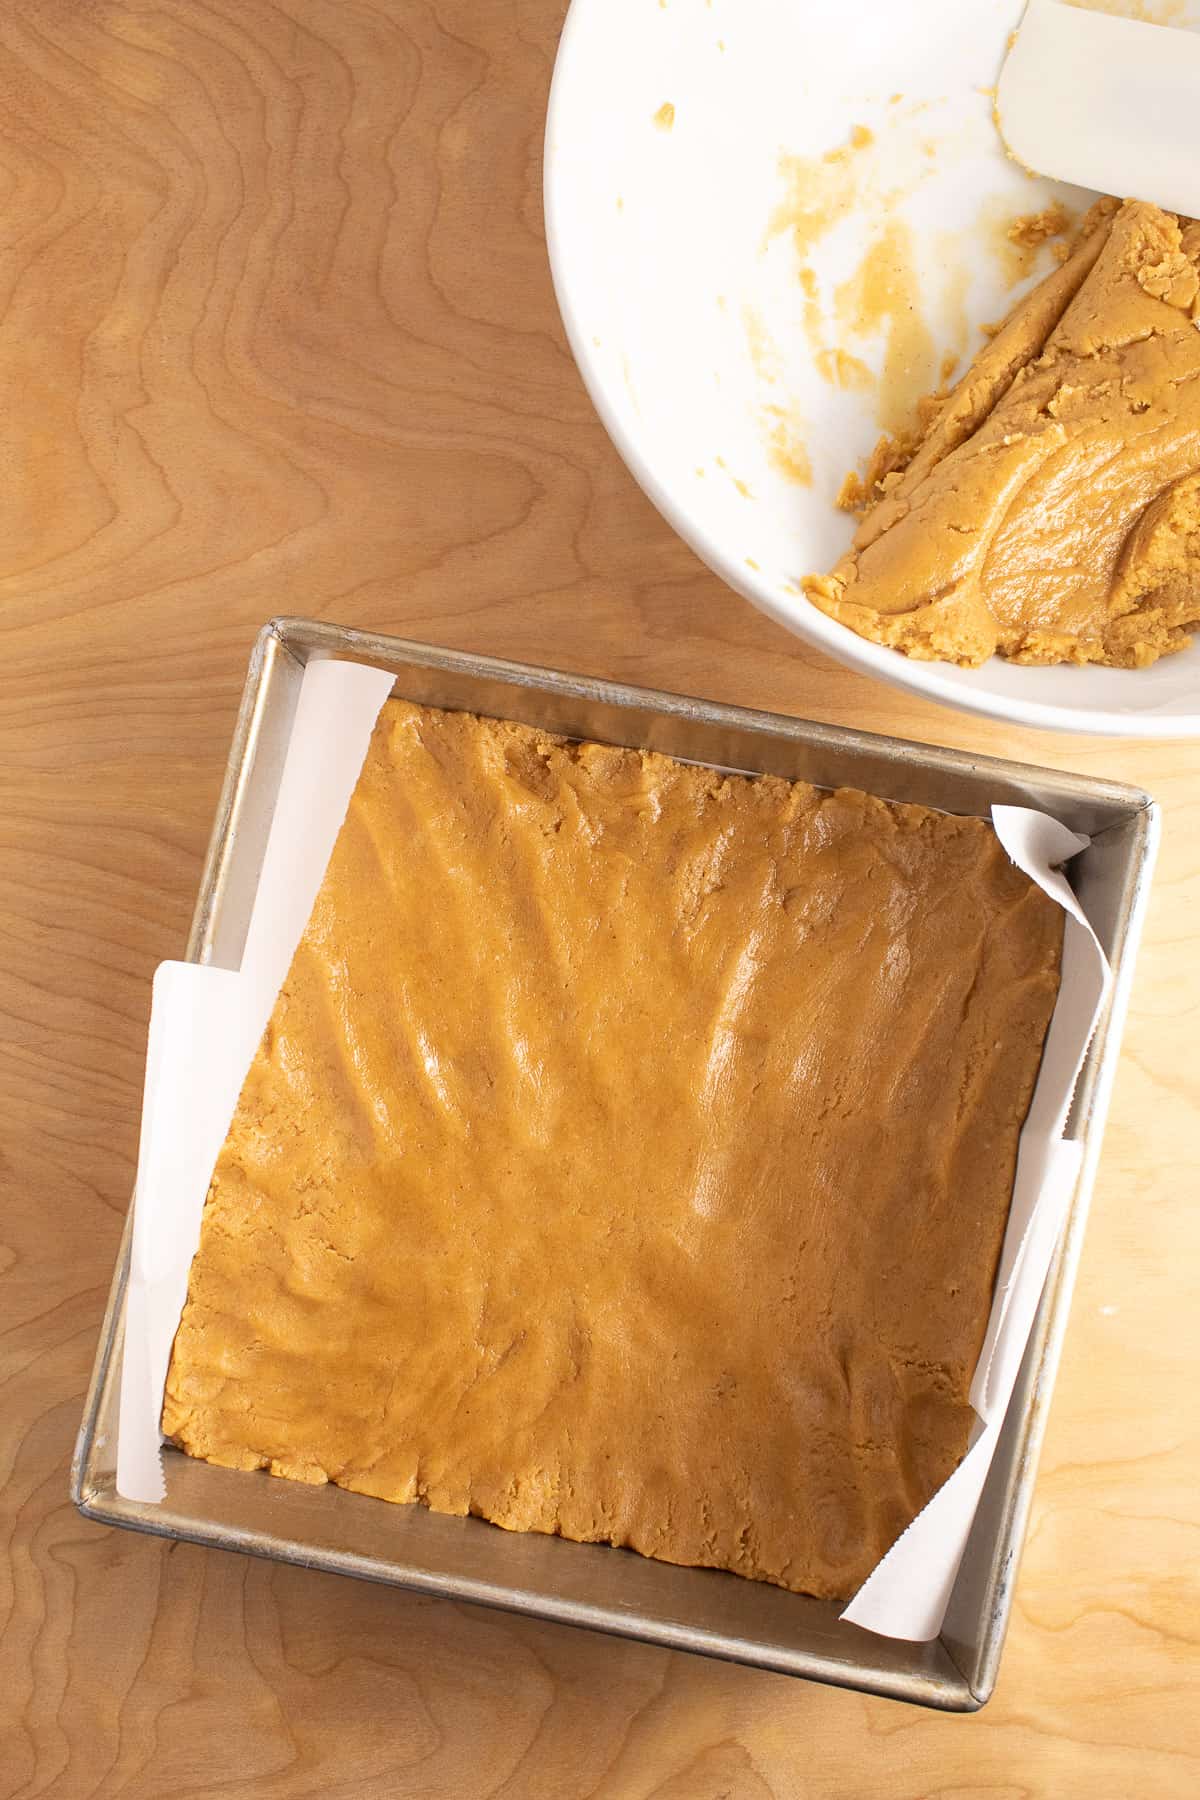 Half of the dough is pressed into the bottom of a square pan lined with parchment paper.